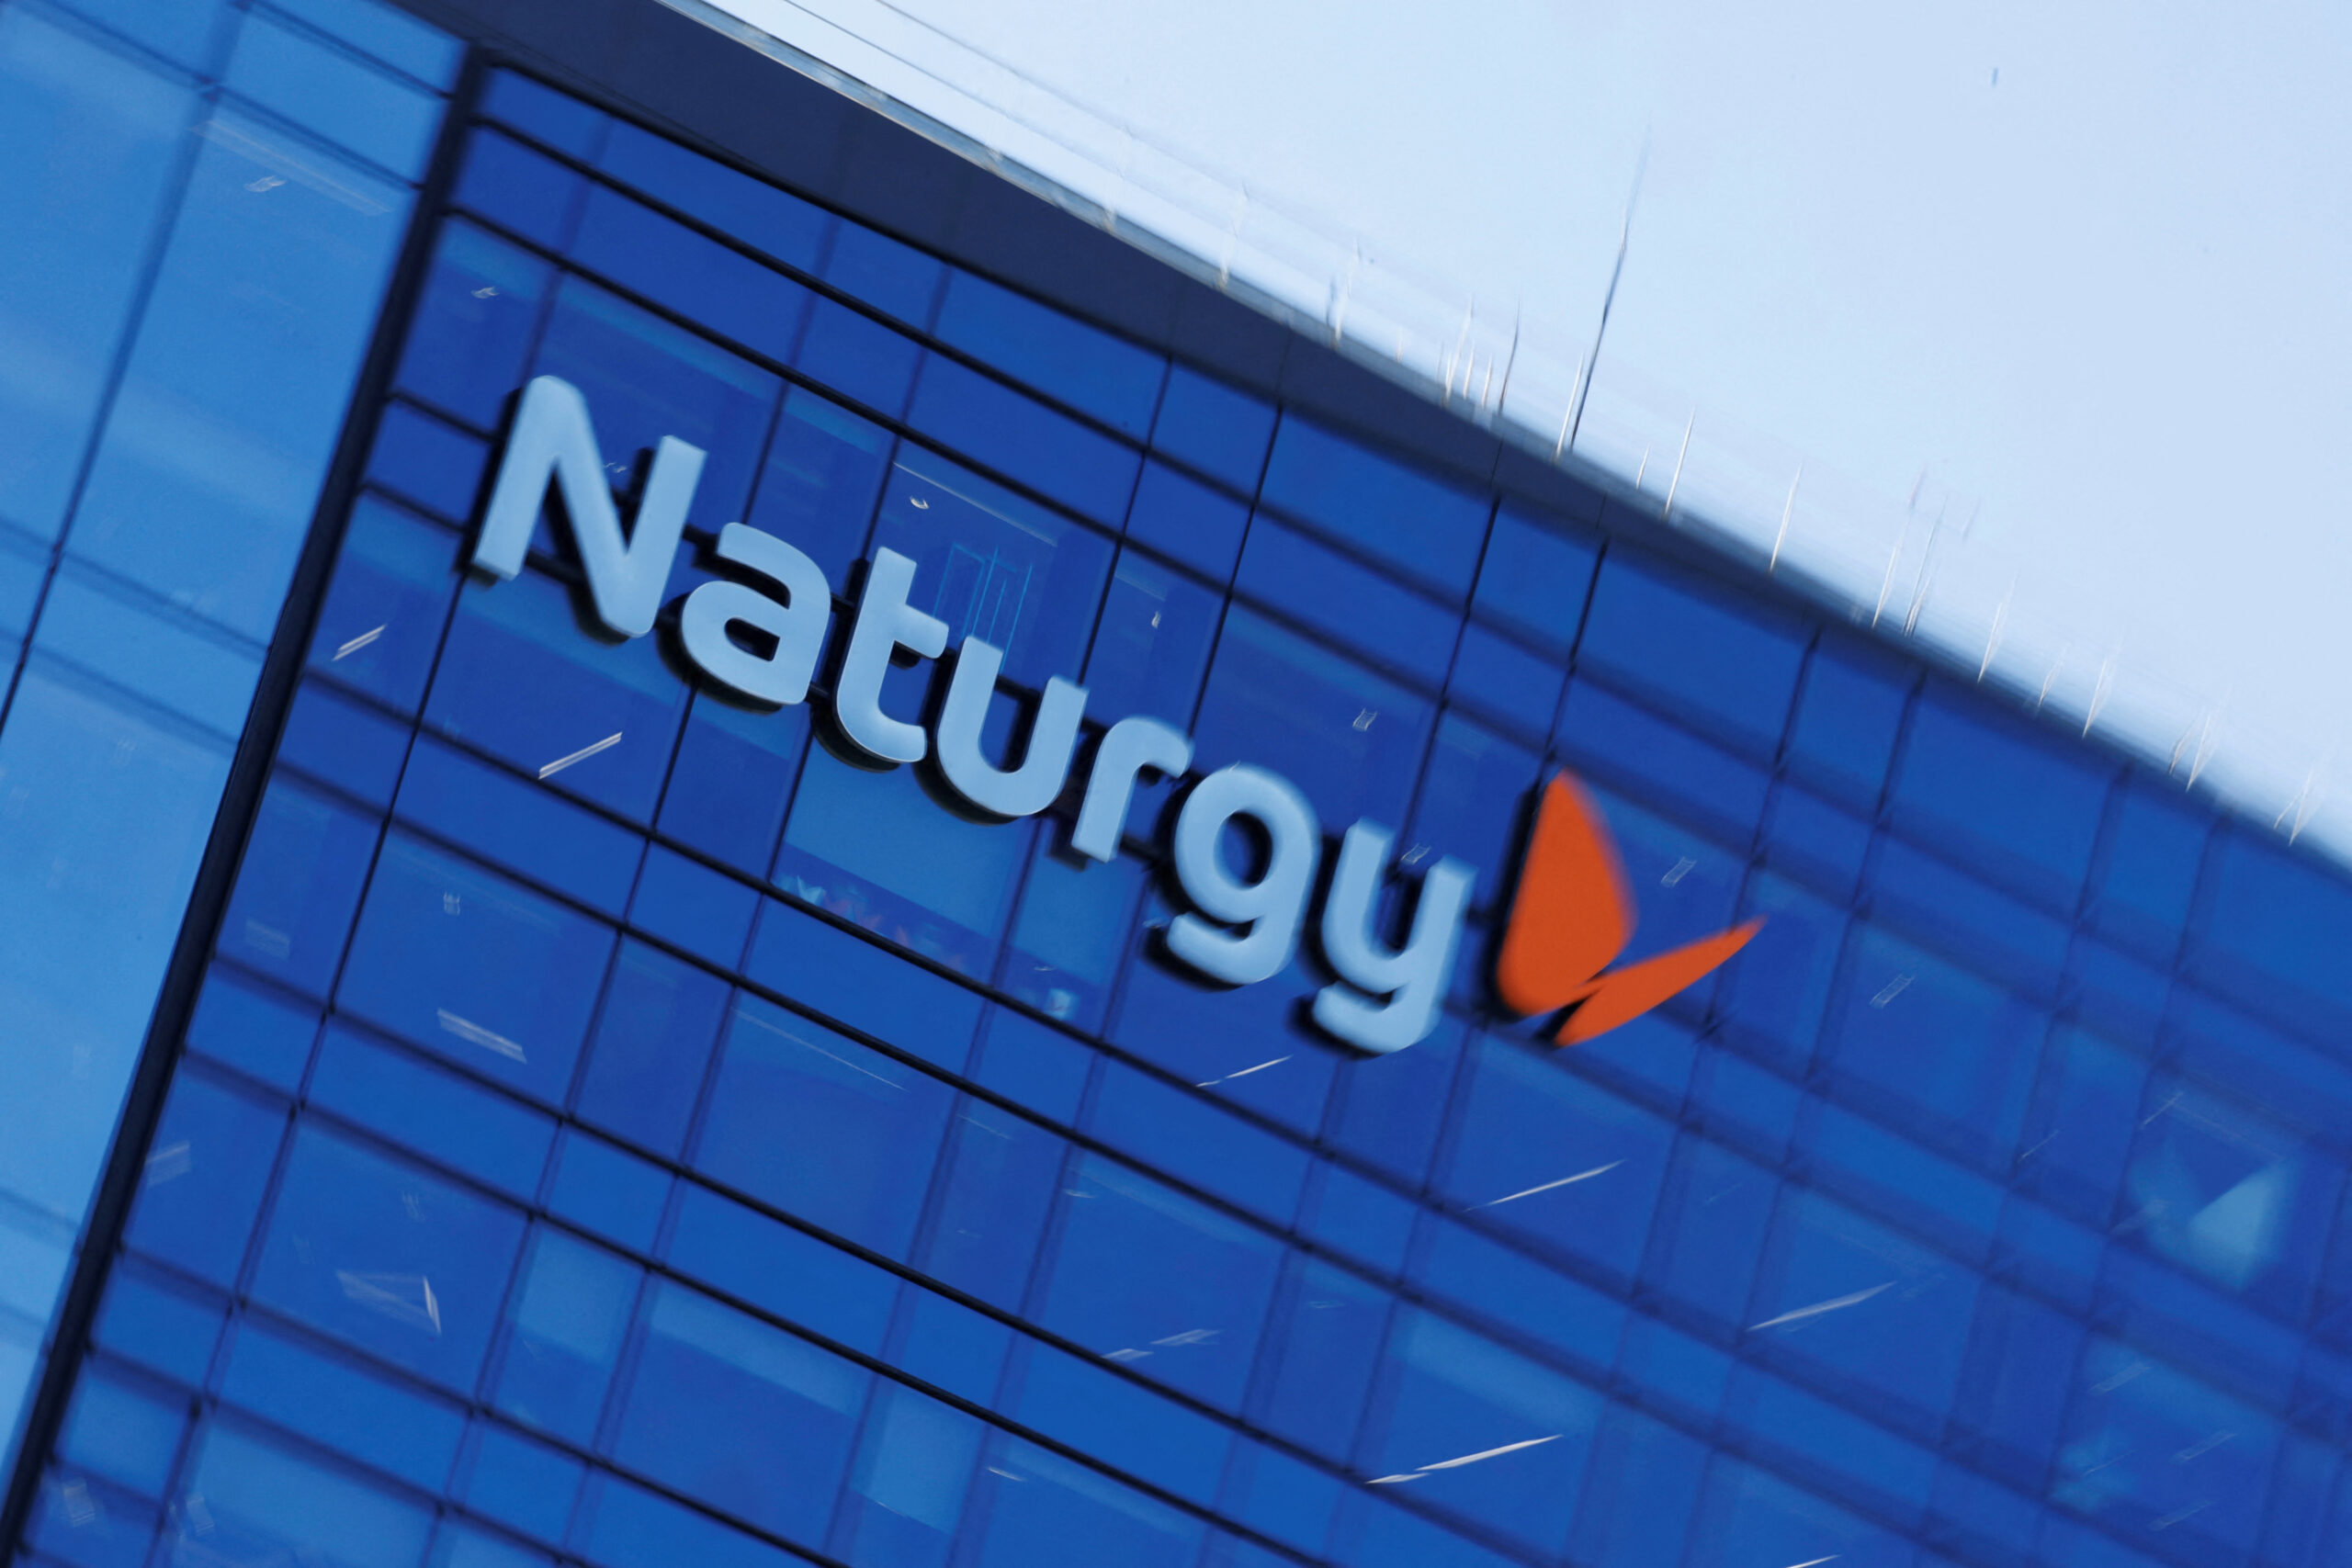 UAE Energy Giant TAQA Ends Negotiations to Acquire Stake in Spanish Utility Naturgy